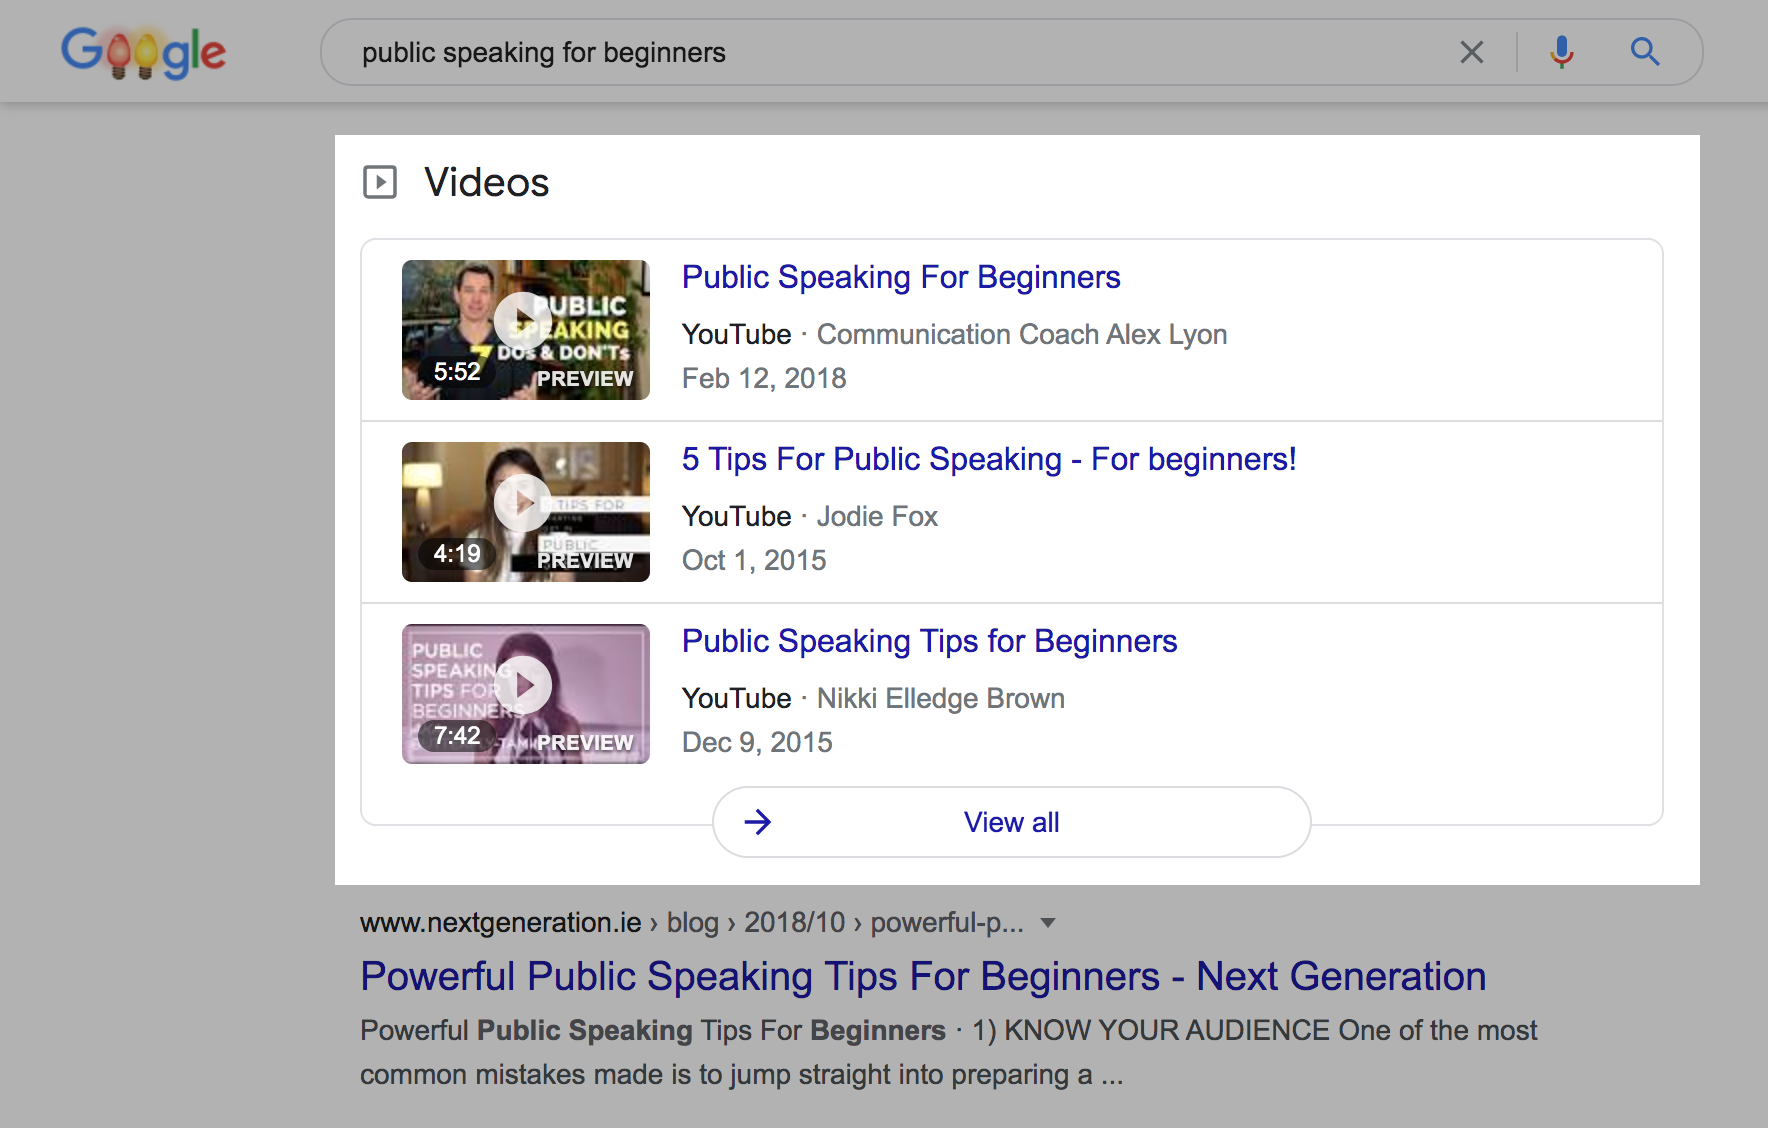 Consequently, your YouTube videos can also rank in Google Search, potentially boosting your views three to five times.